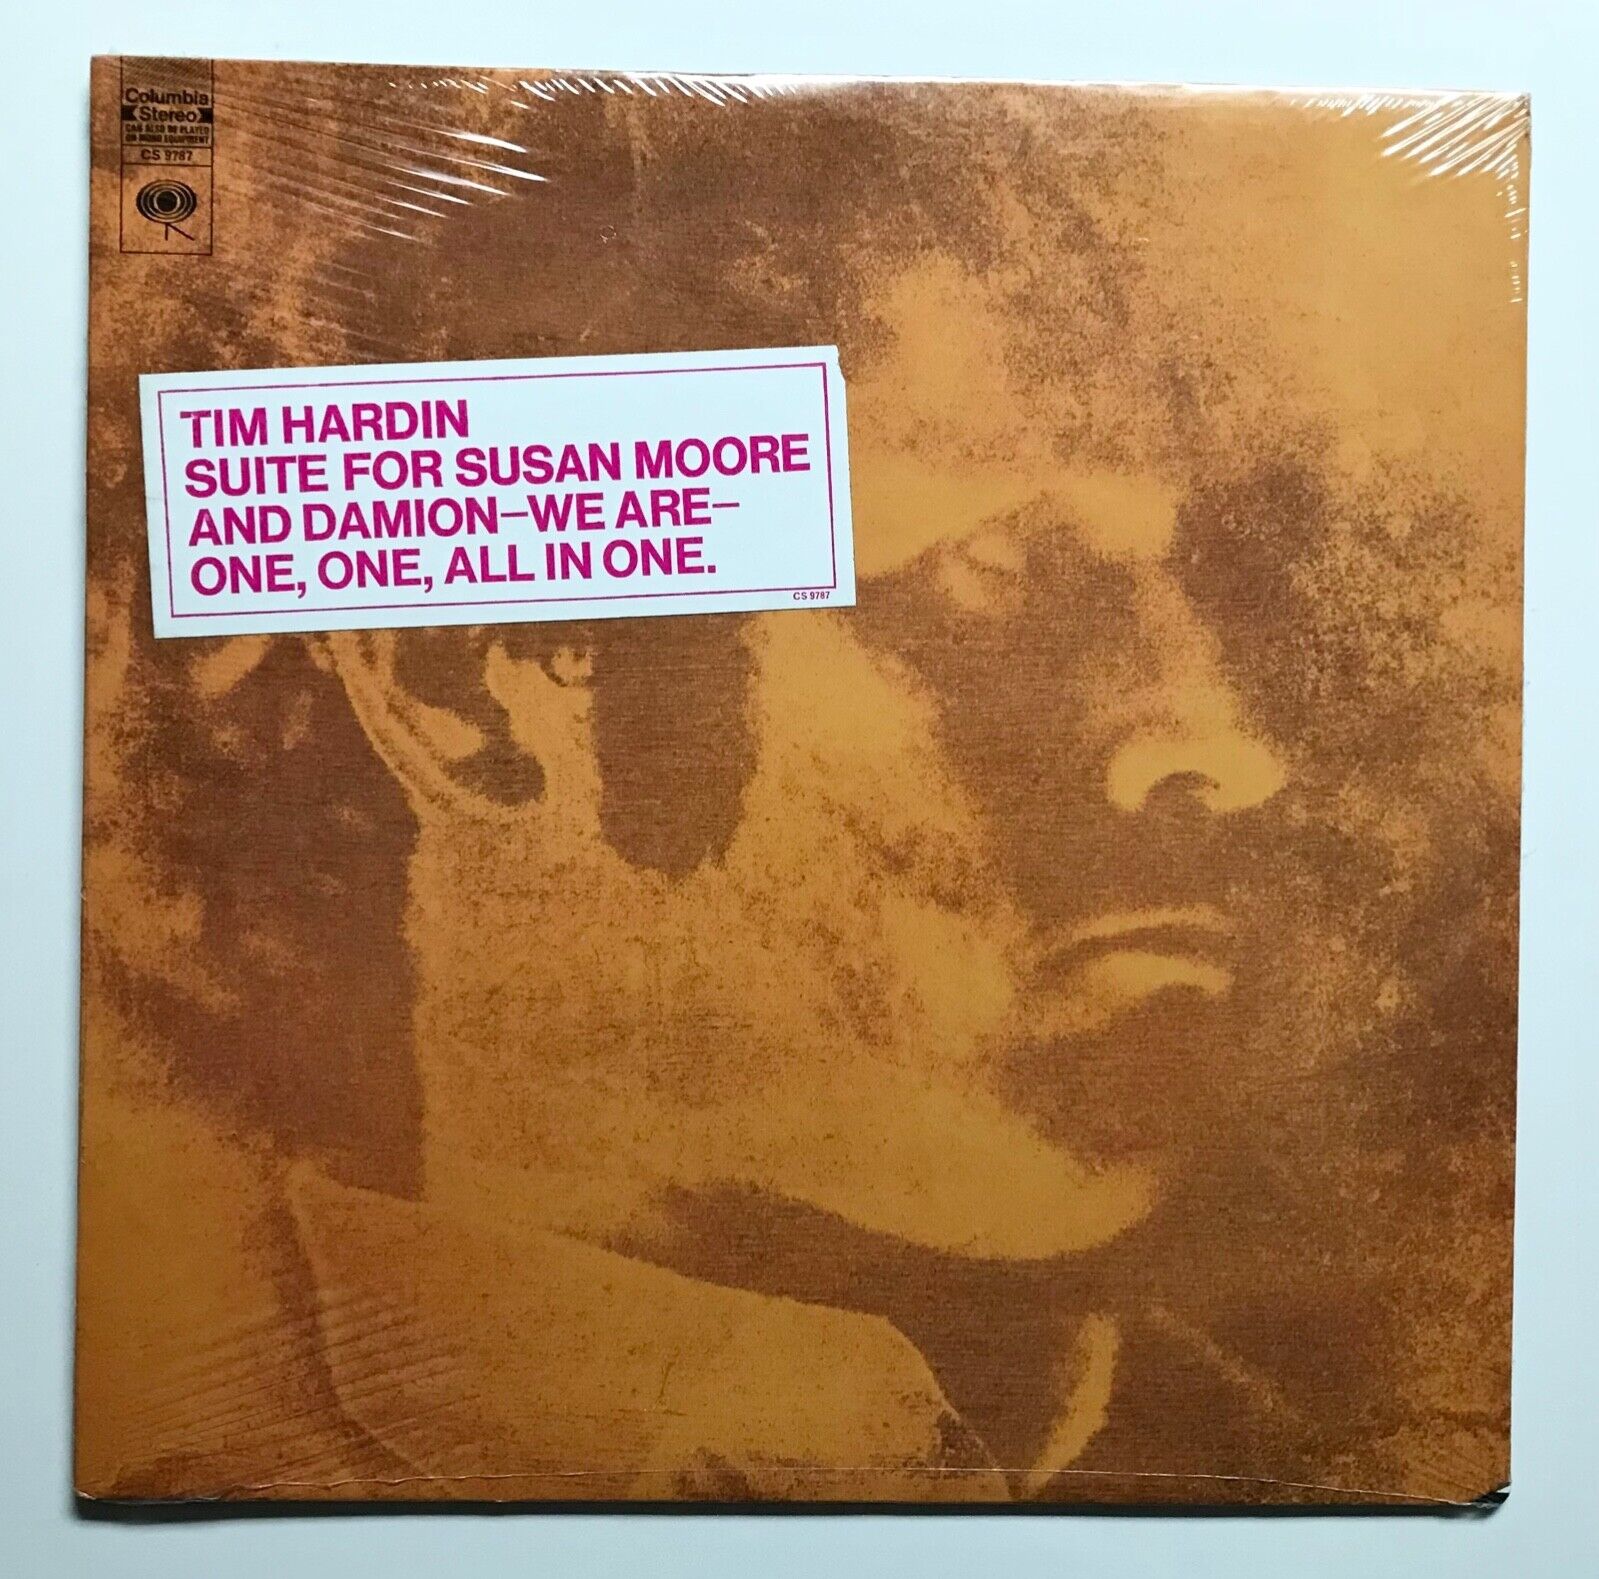 TIM HARDIN: Suite For Susan Moore and Damion (Vinyl LP Record Sealed)